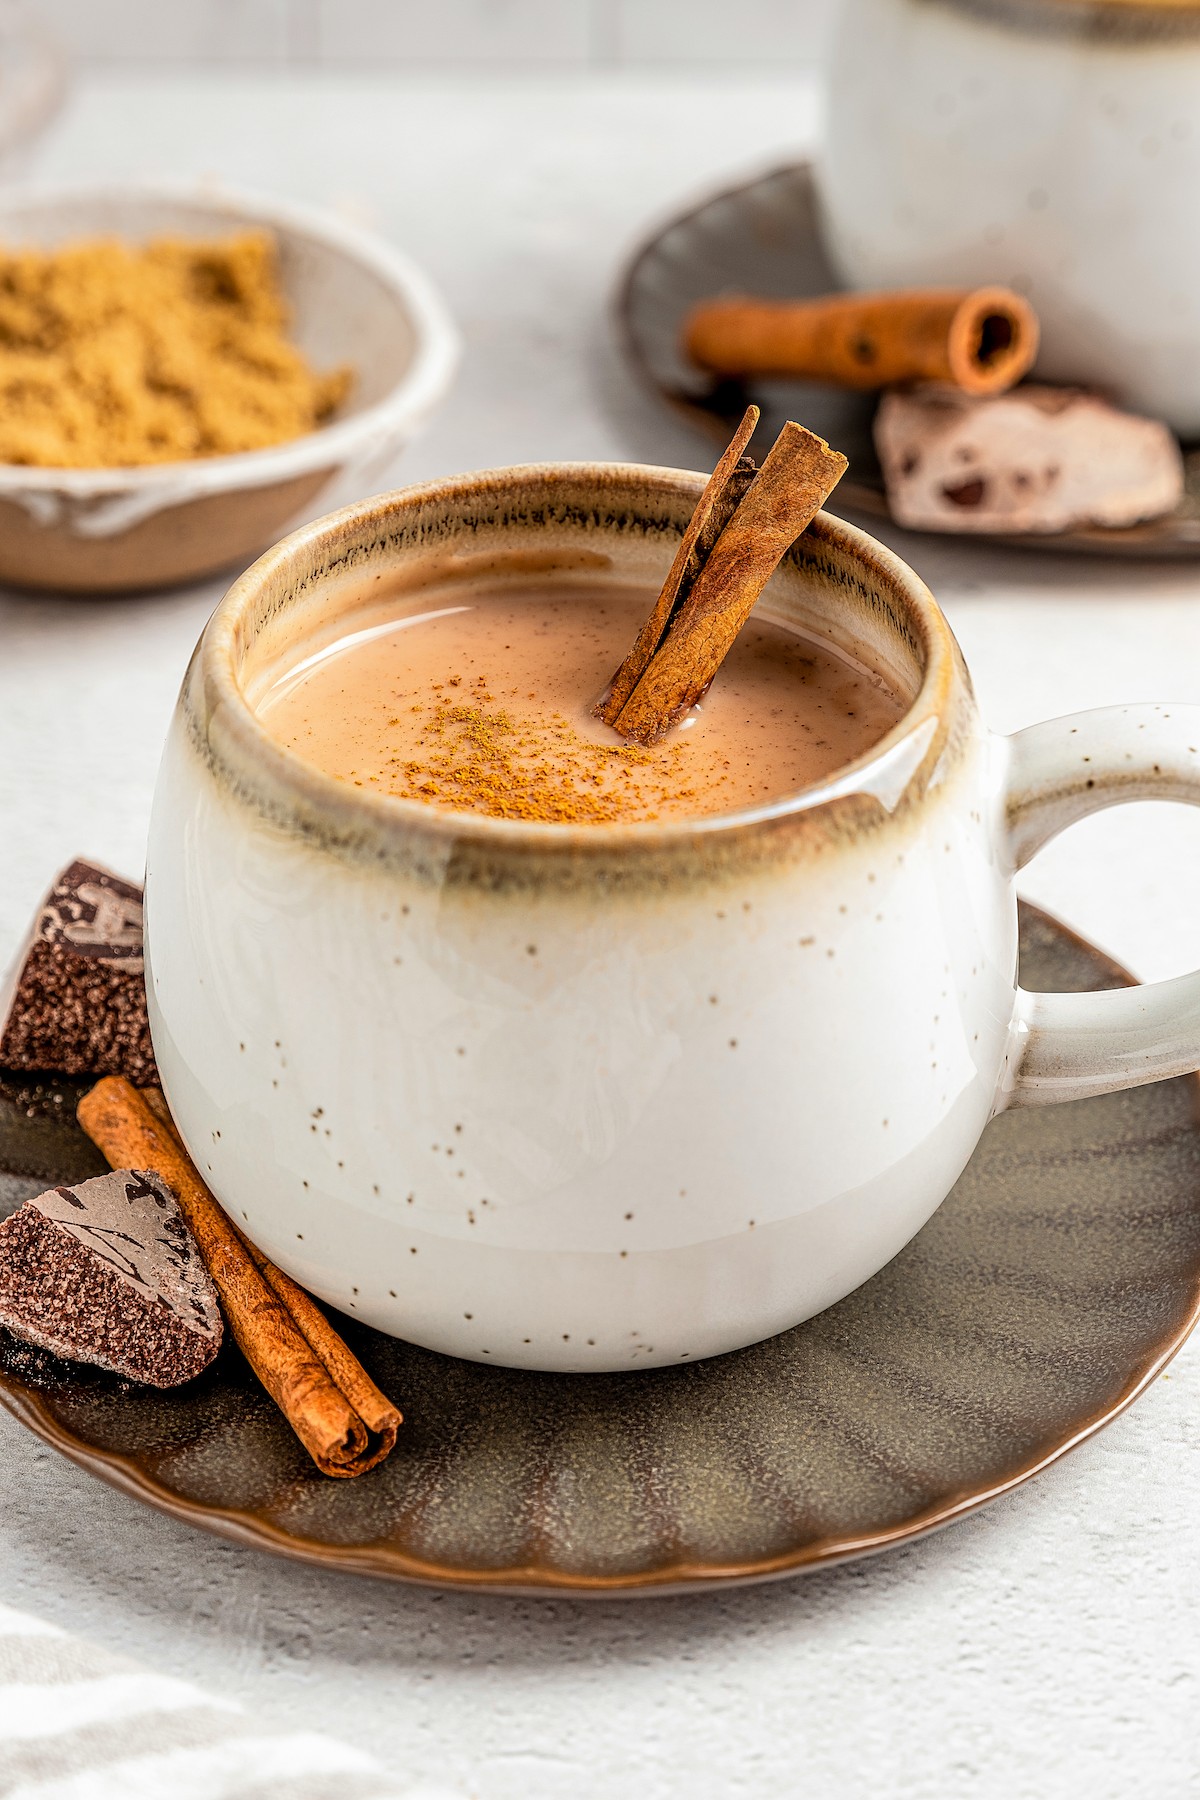 A mug of Chocolate Atole with cinnamon sticks and Mexican chocolate on the side.